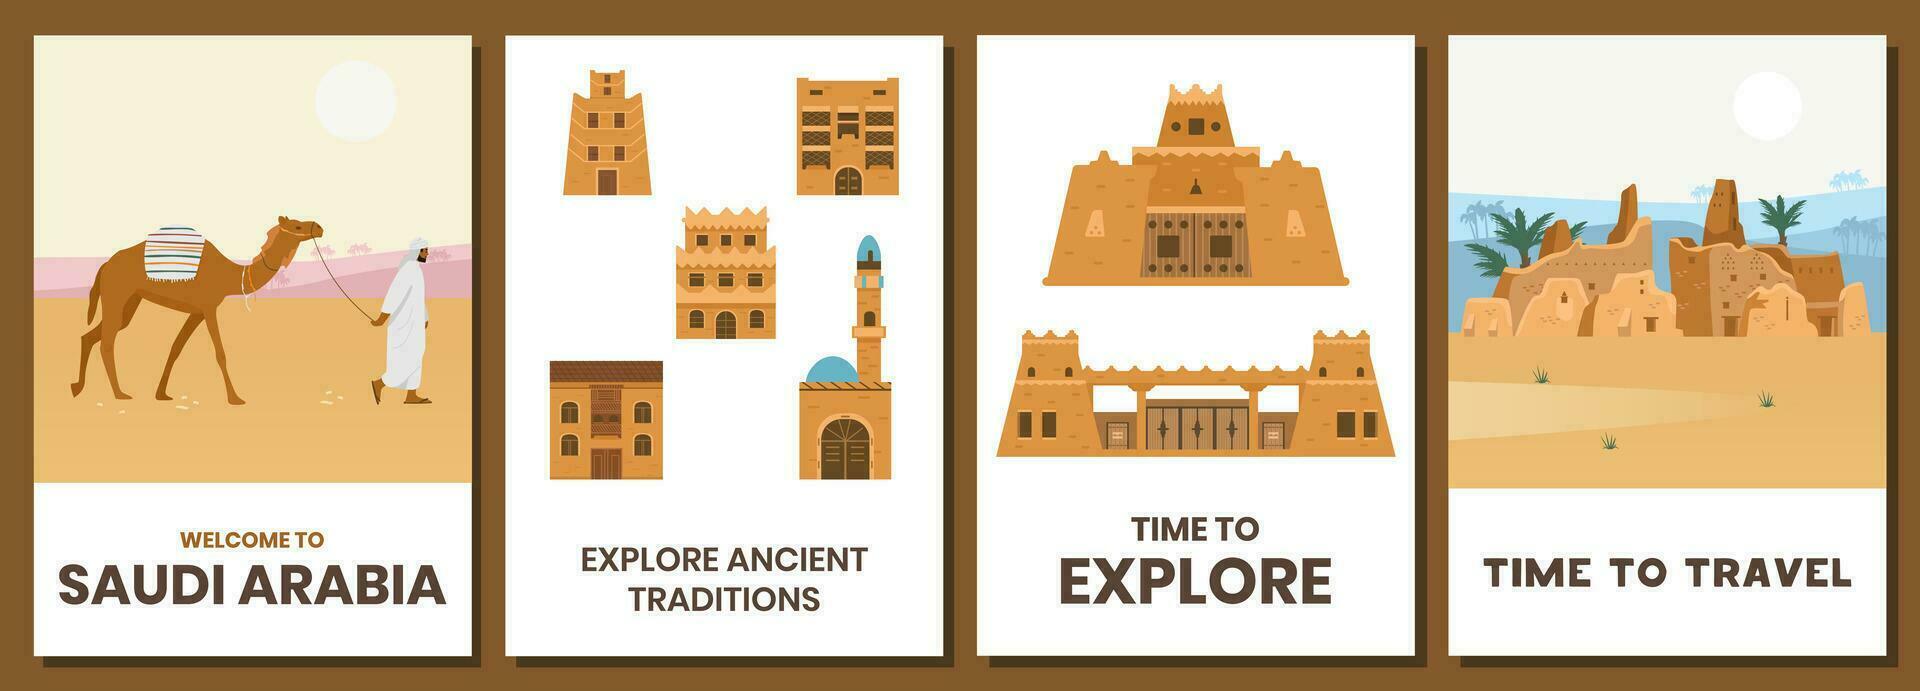 Welcome to Saudi Arabia vector cards set. Authentic traditional architecture, desert landscape, castles and sightseeing.